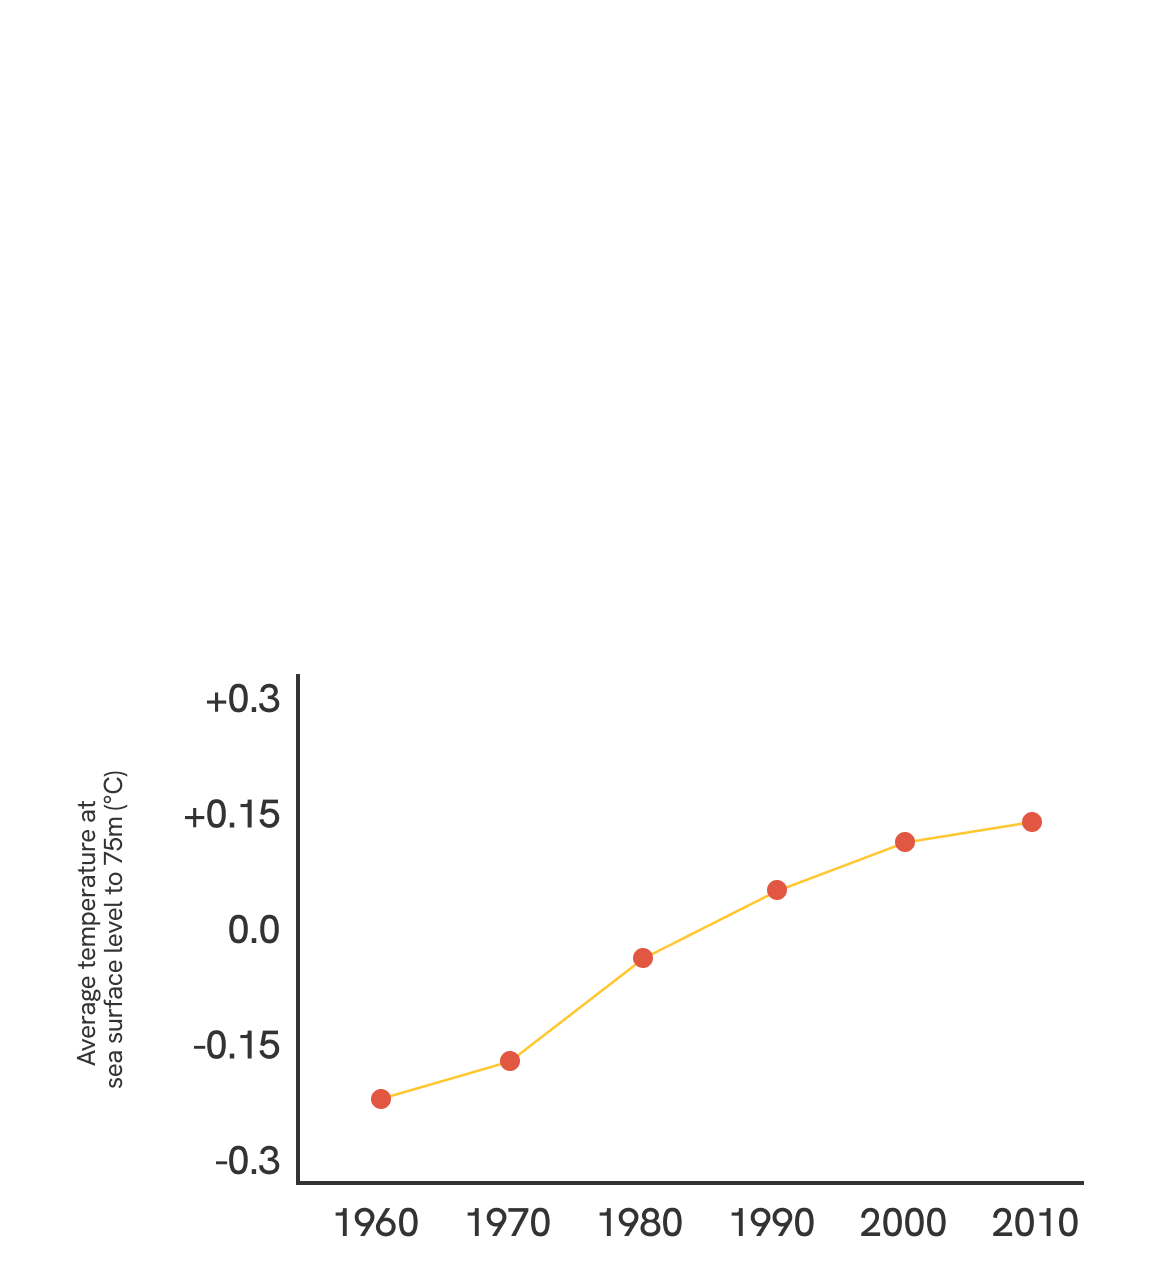 Graph showing the rising temperature at sea surface level each decade since 1960.